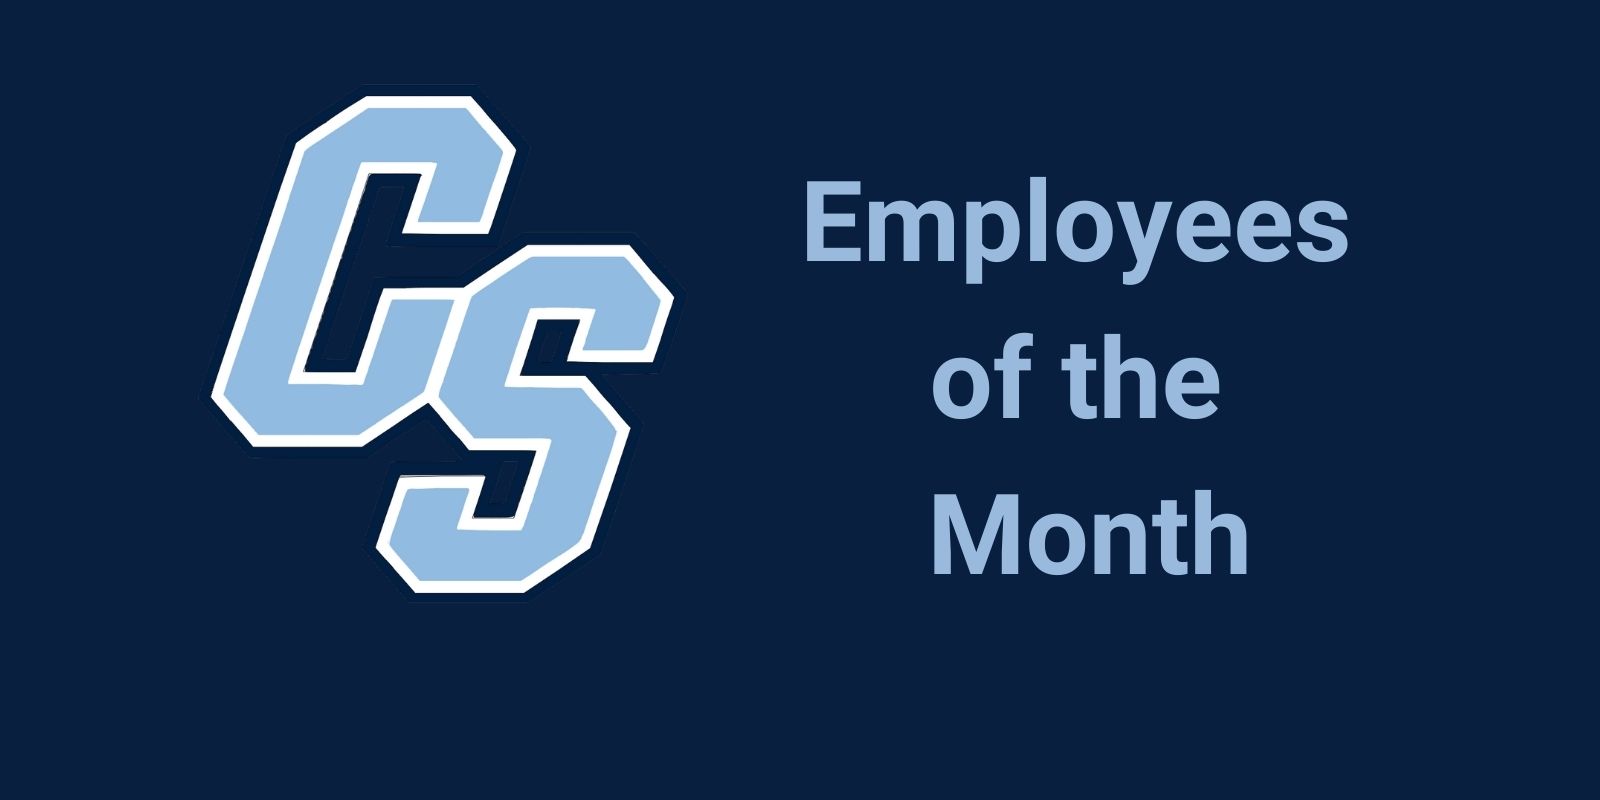 Employees of the Month